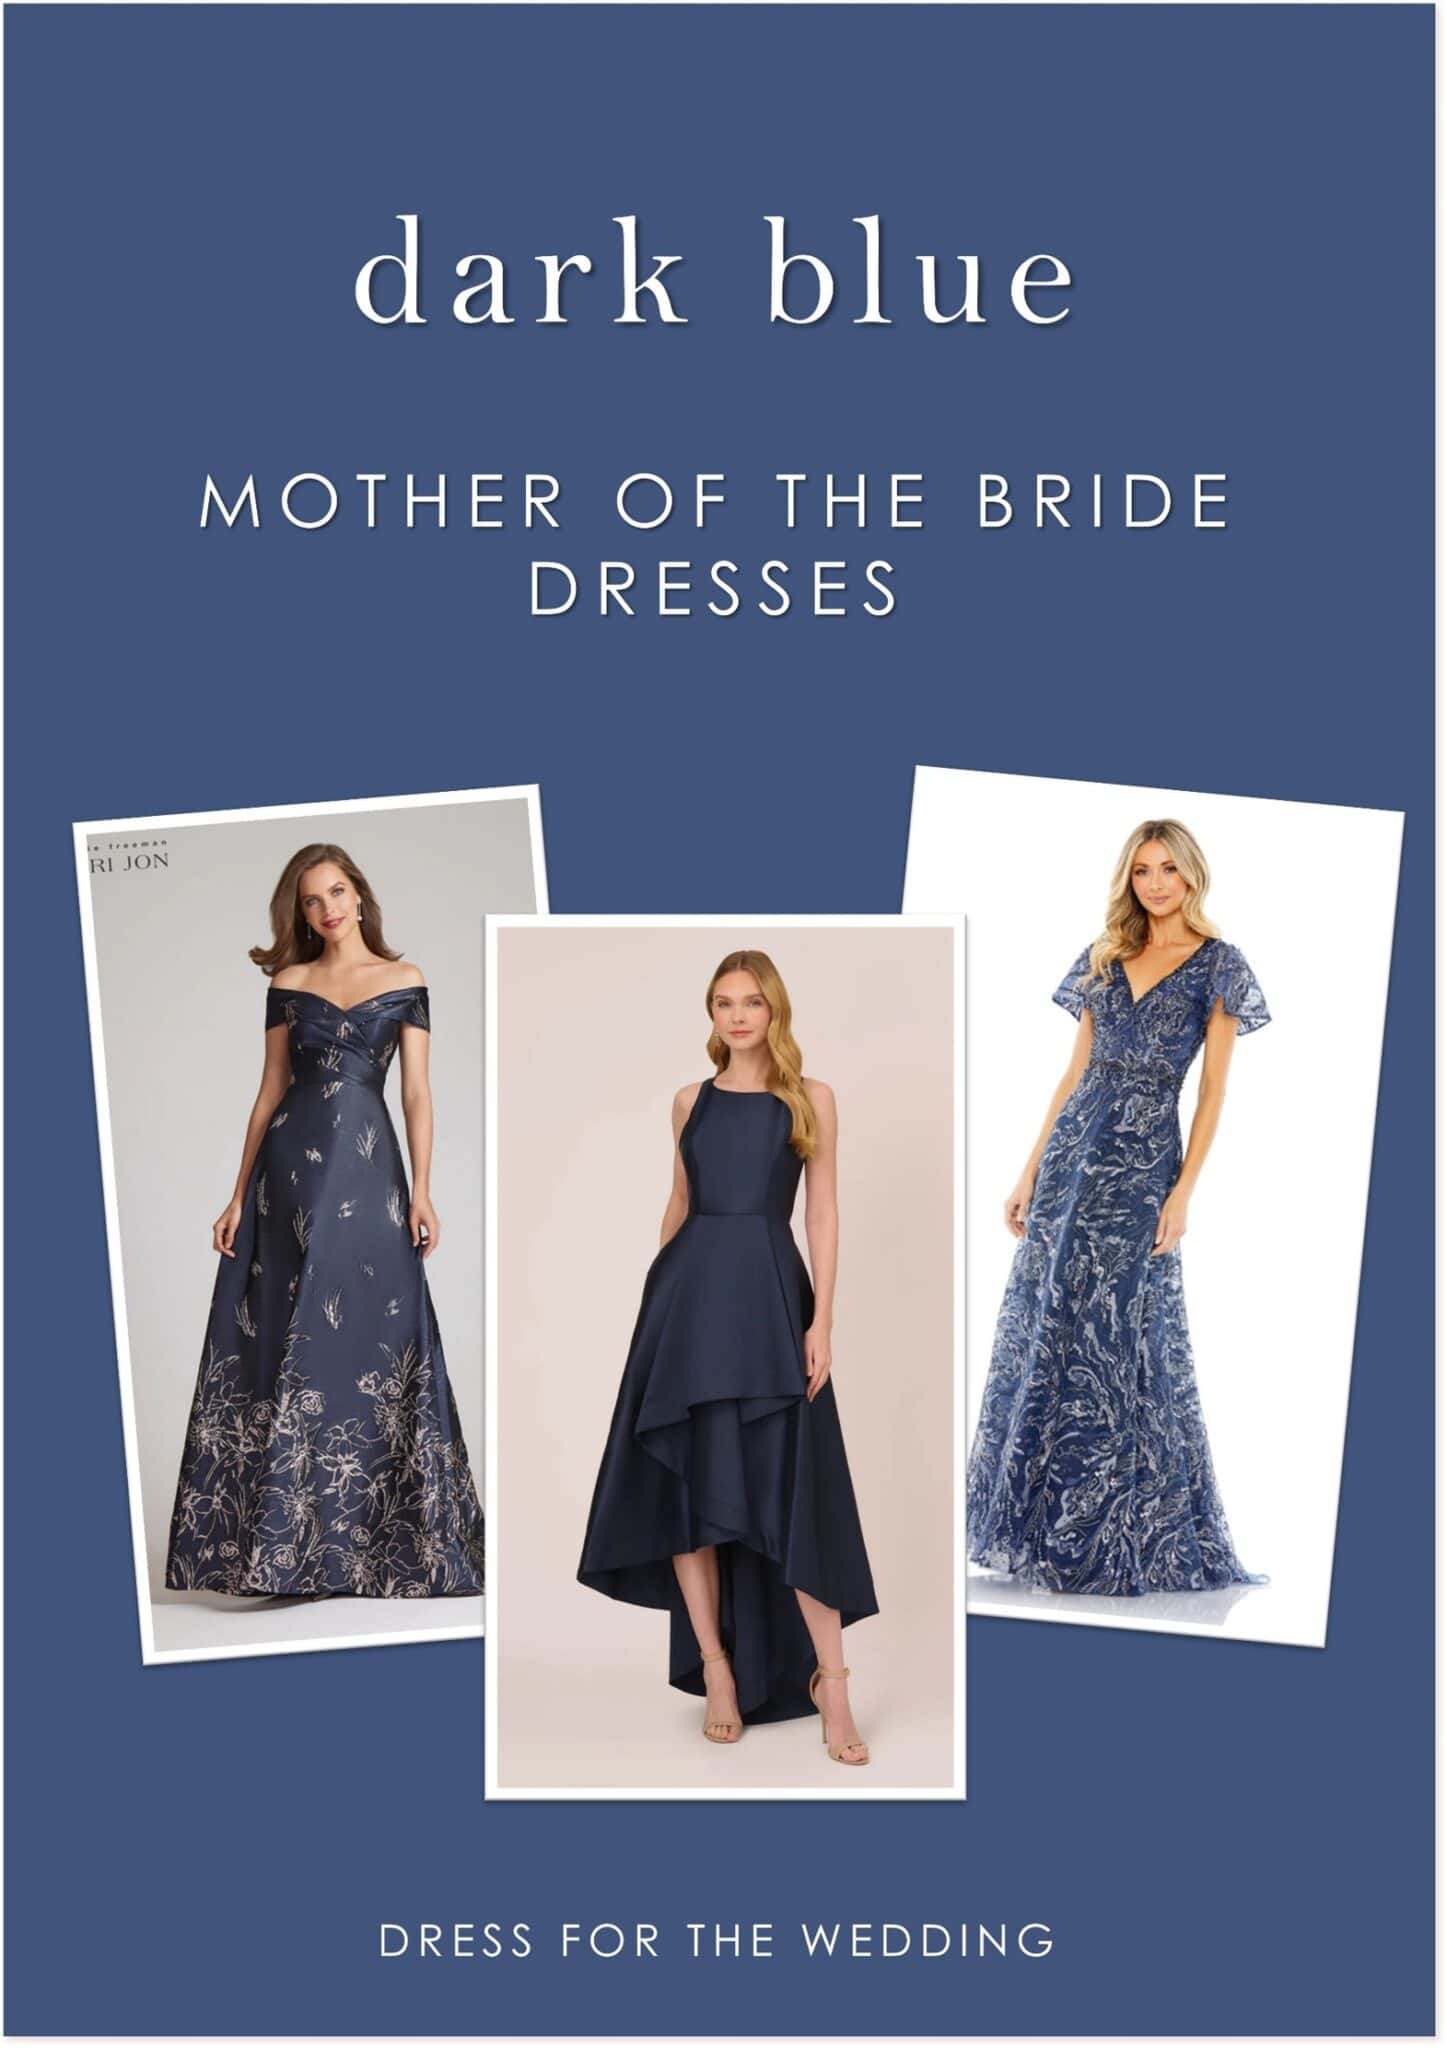 Dark Blue Mother of the Bride Dresses - Dress for the Wedding